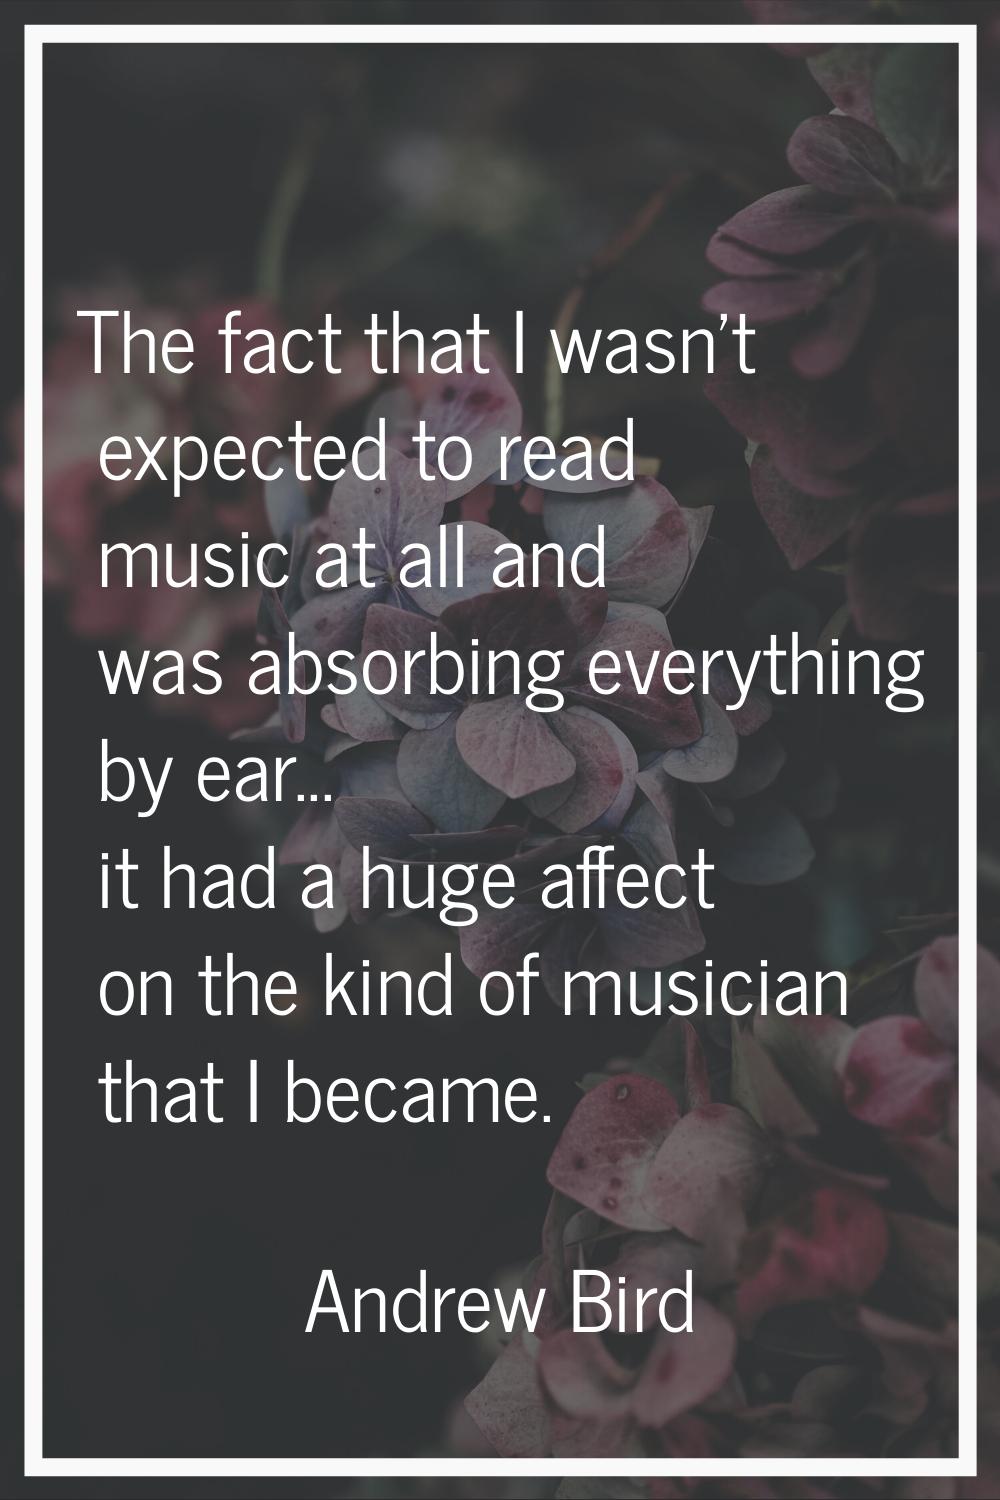 The fact that I wasn't expected to read music at all and was absorbing everything by ear... it had 